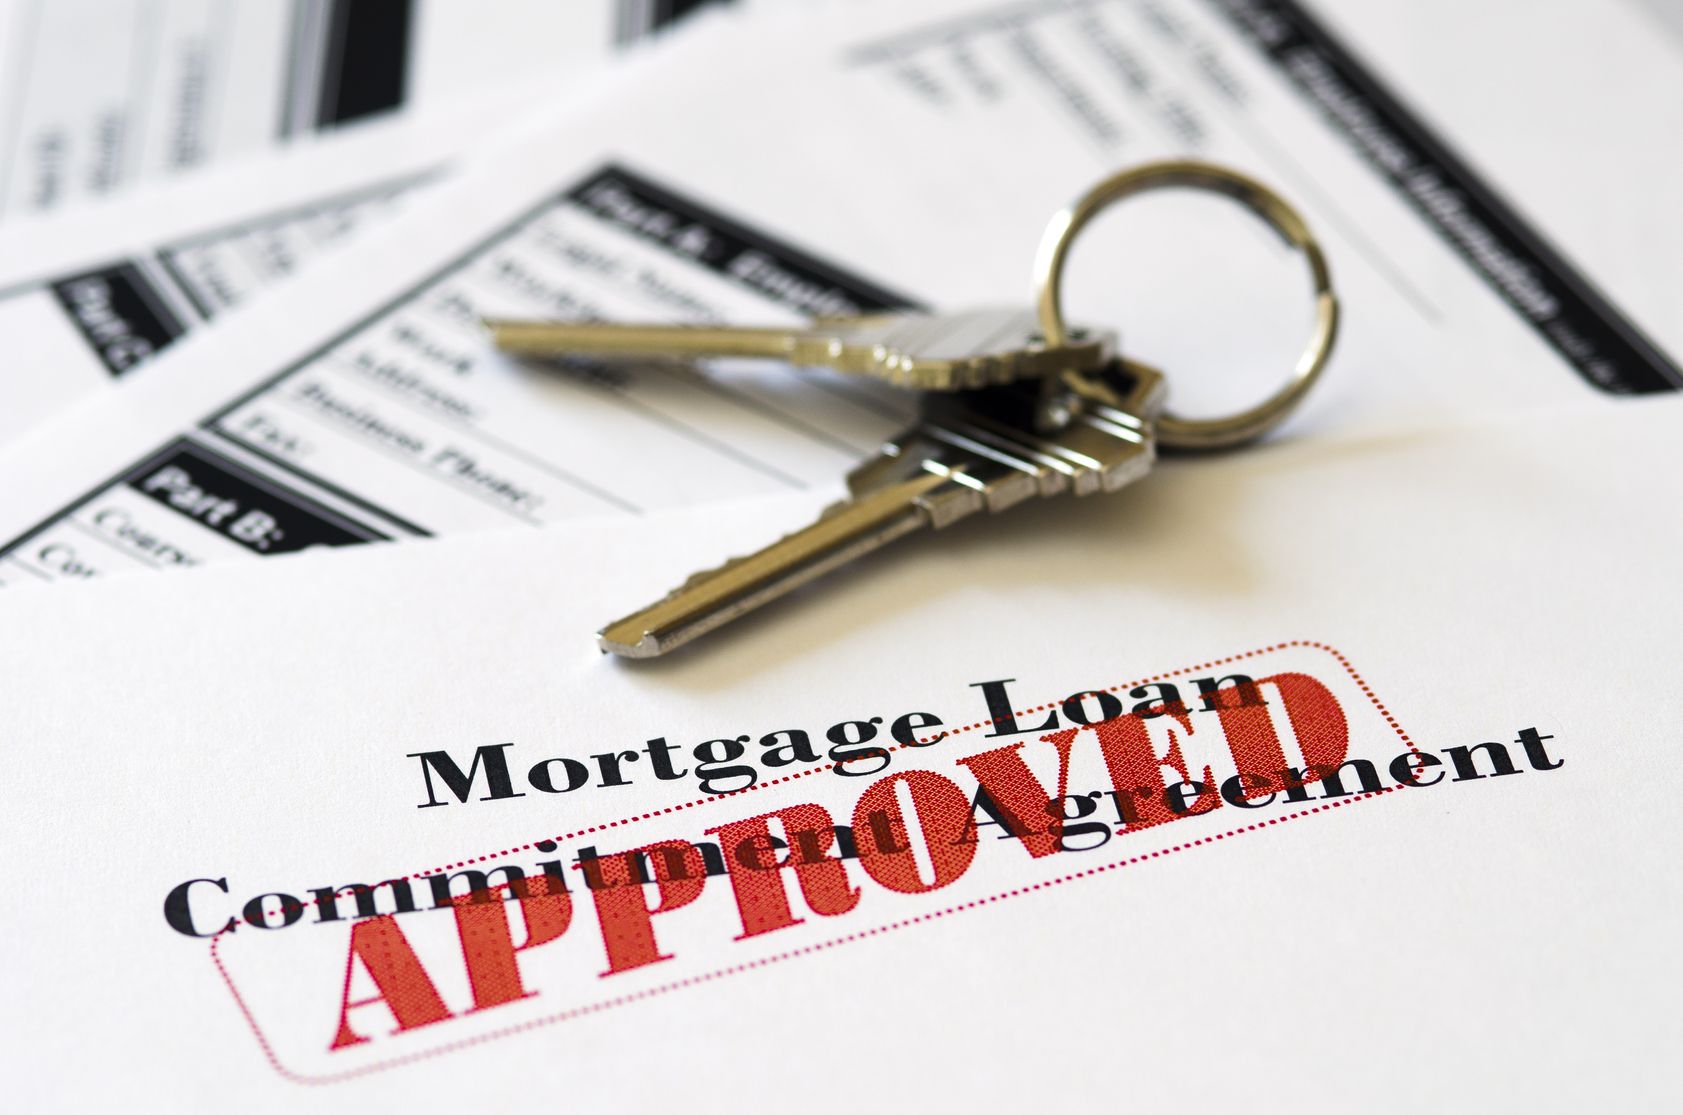 approved loan mortgage documentation system 14556659  real estate document with house keys